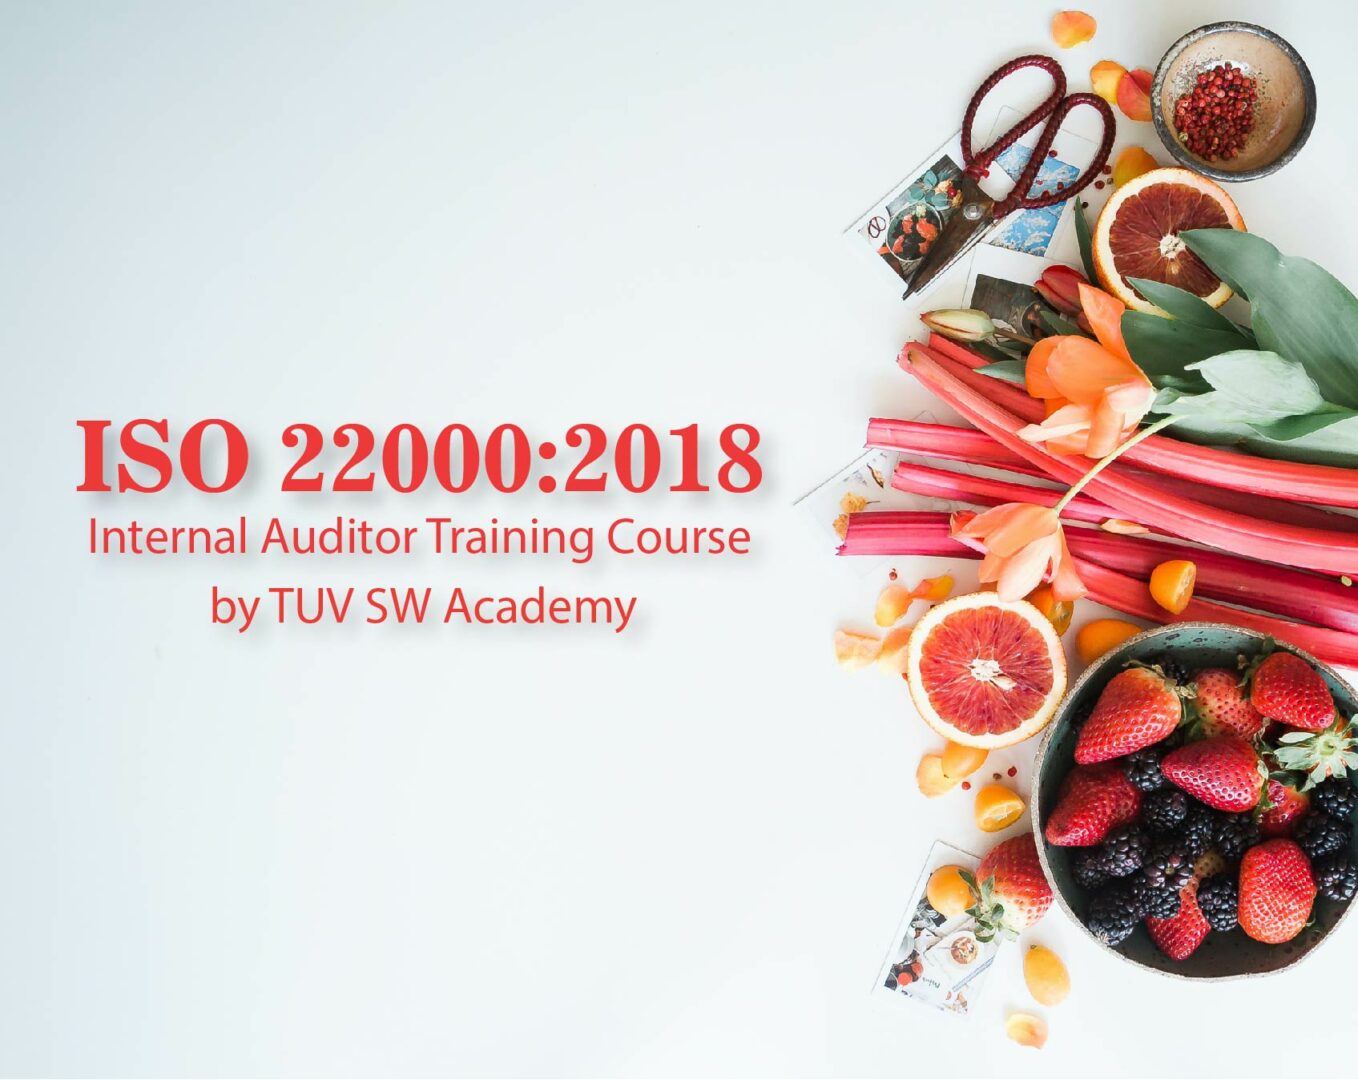 ISO 22000:2018 (FSMS) Internal Auditor Training Course